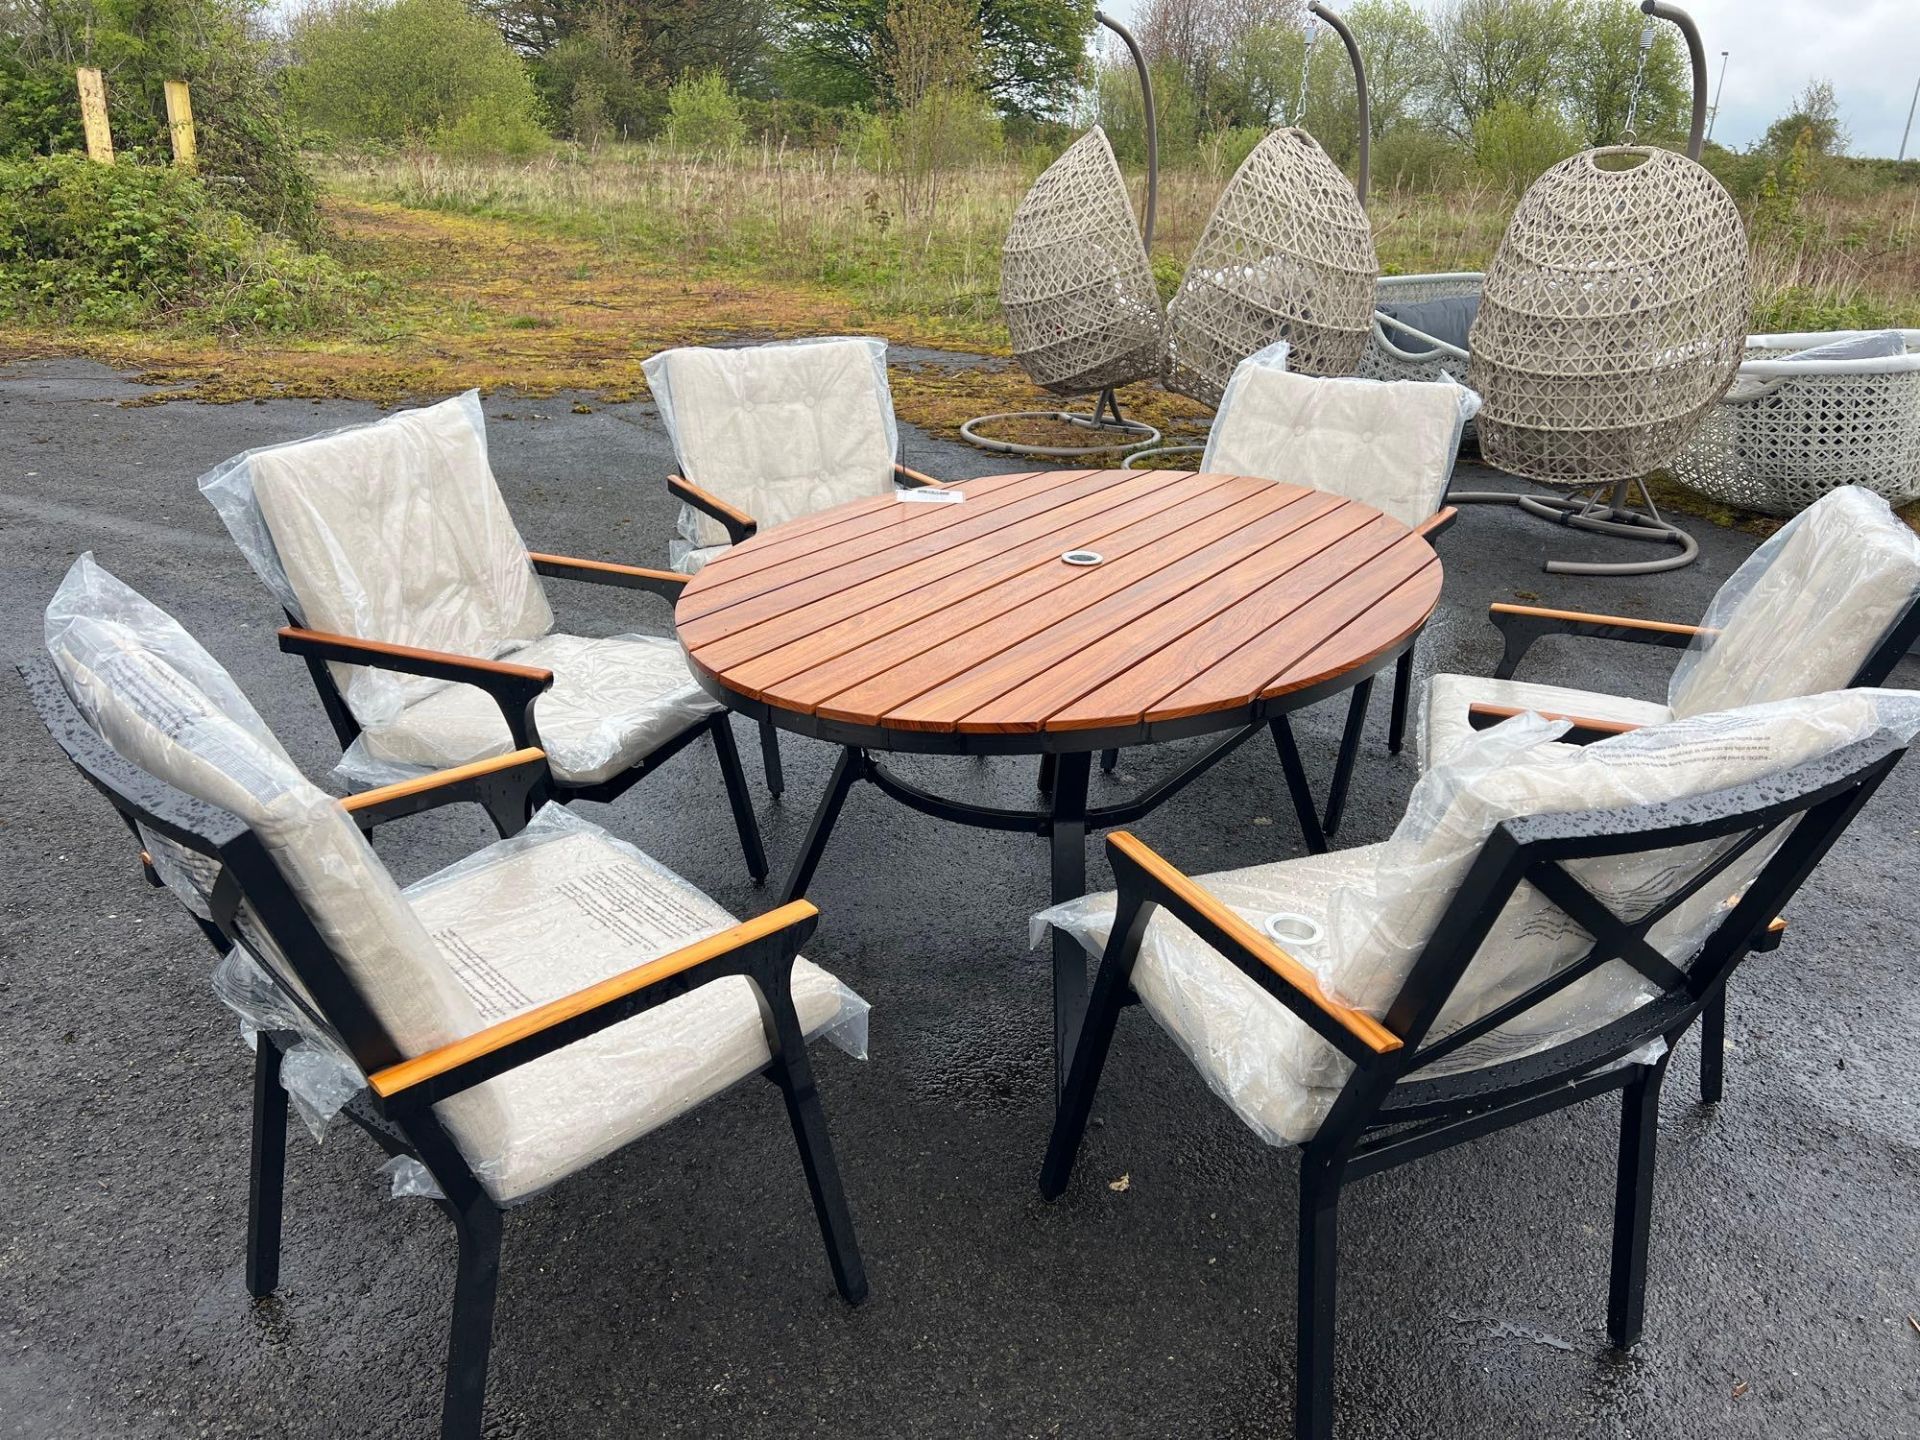 A130 Teak Topped Elliptical Table with 6 x chairs.